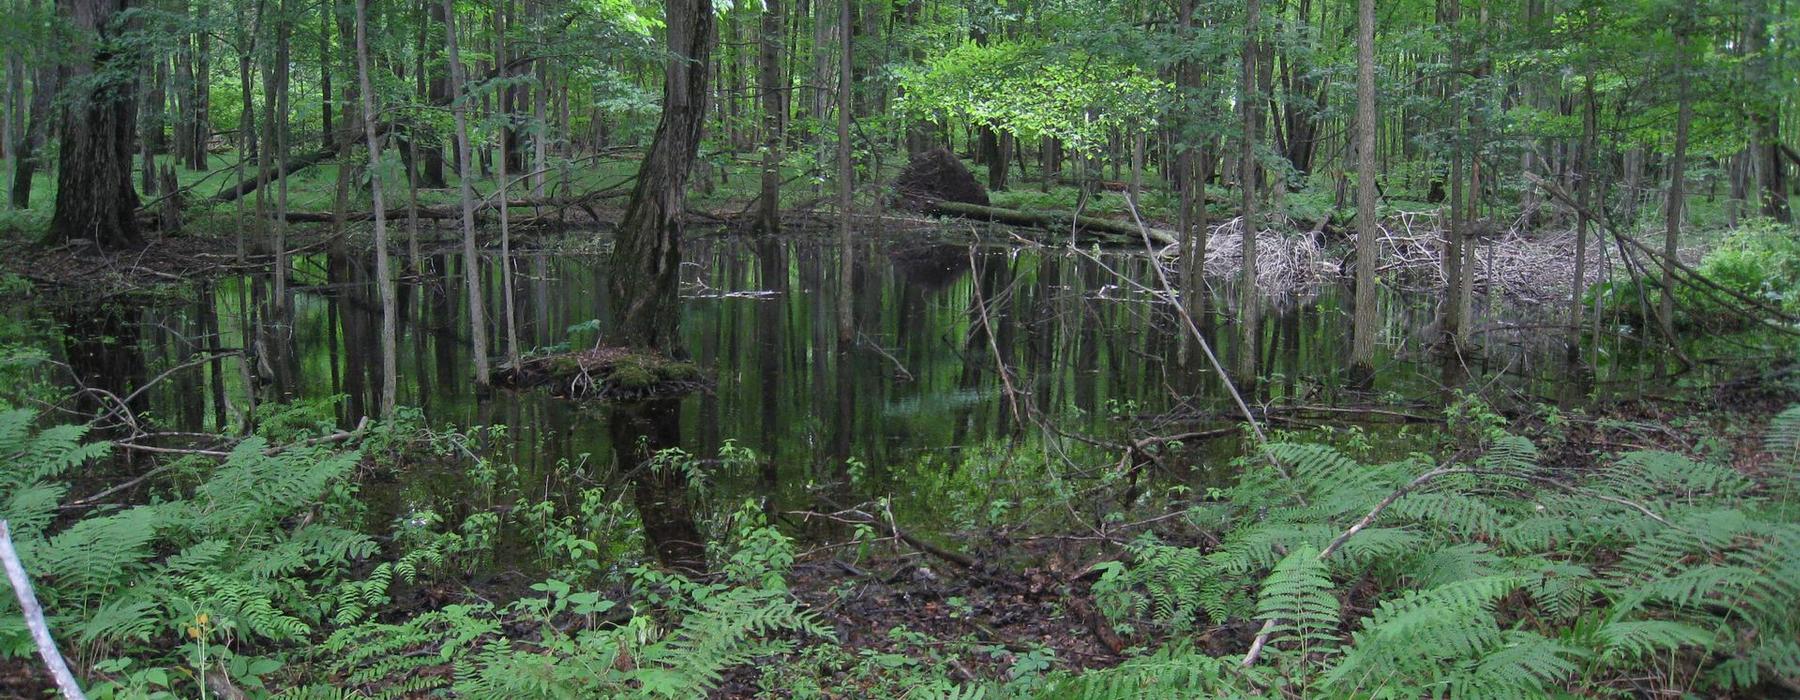 Encourage vernal pool conservation through local and state measures